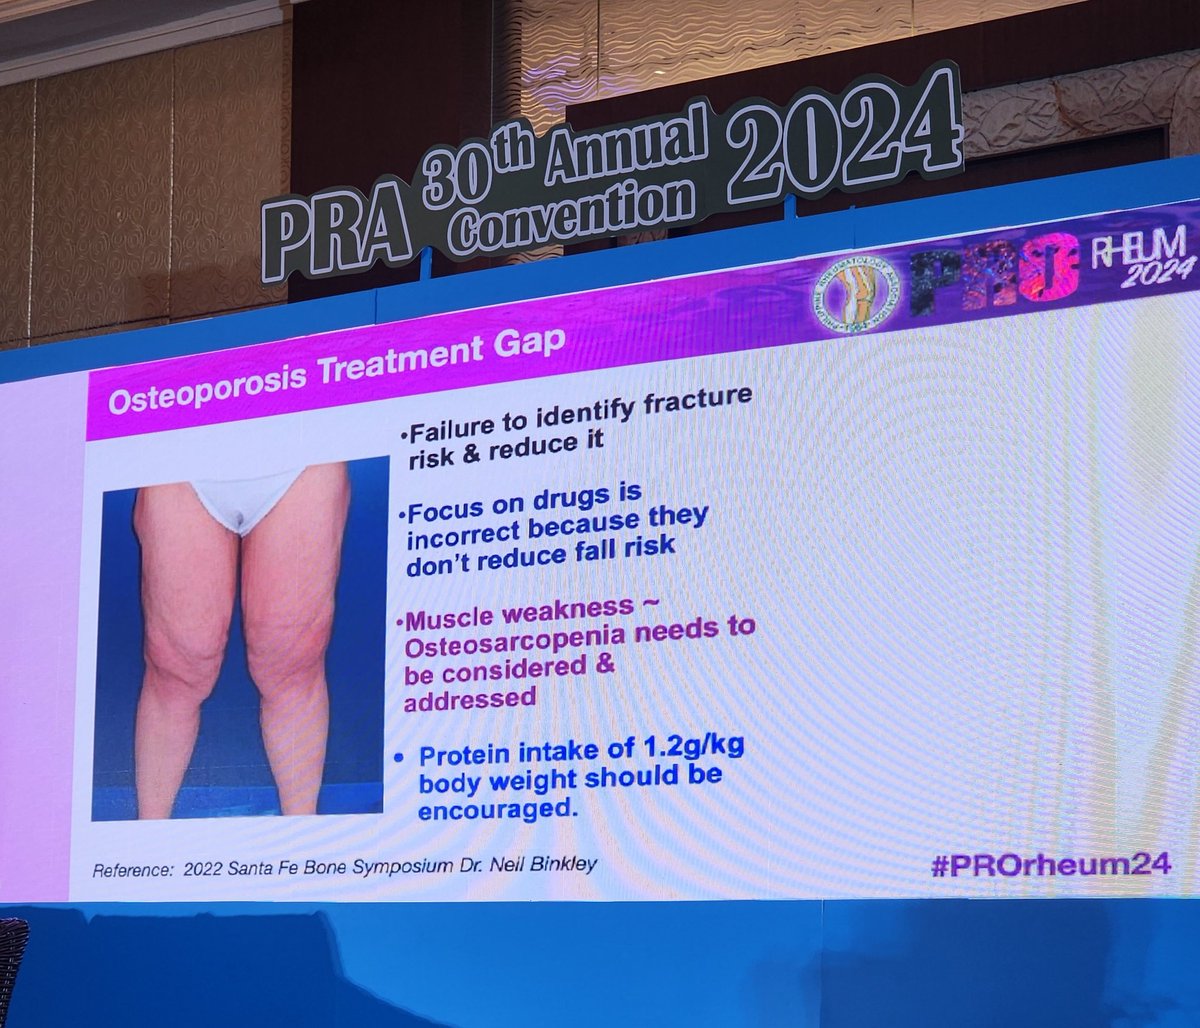 For #osteoporosis management, drugs are not enough because they do not reduce fall risk. #Sarcopenia should also be addressed. #OnePRA2024